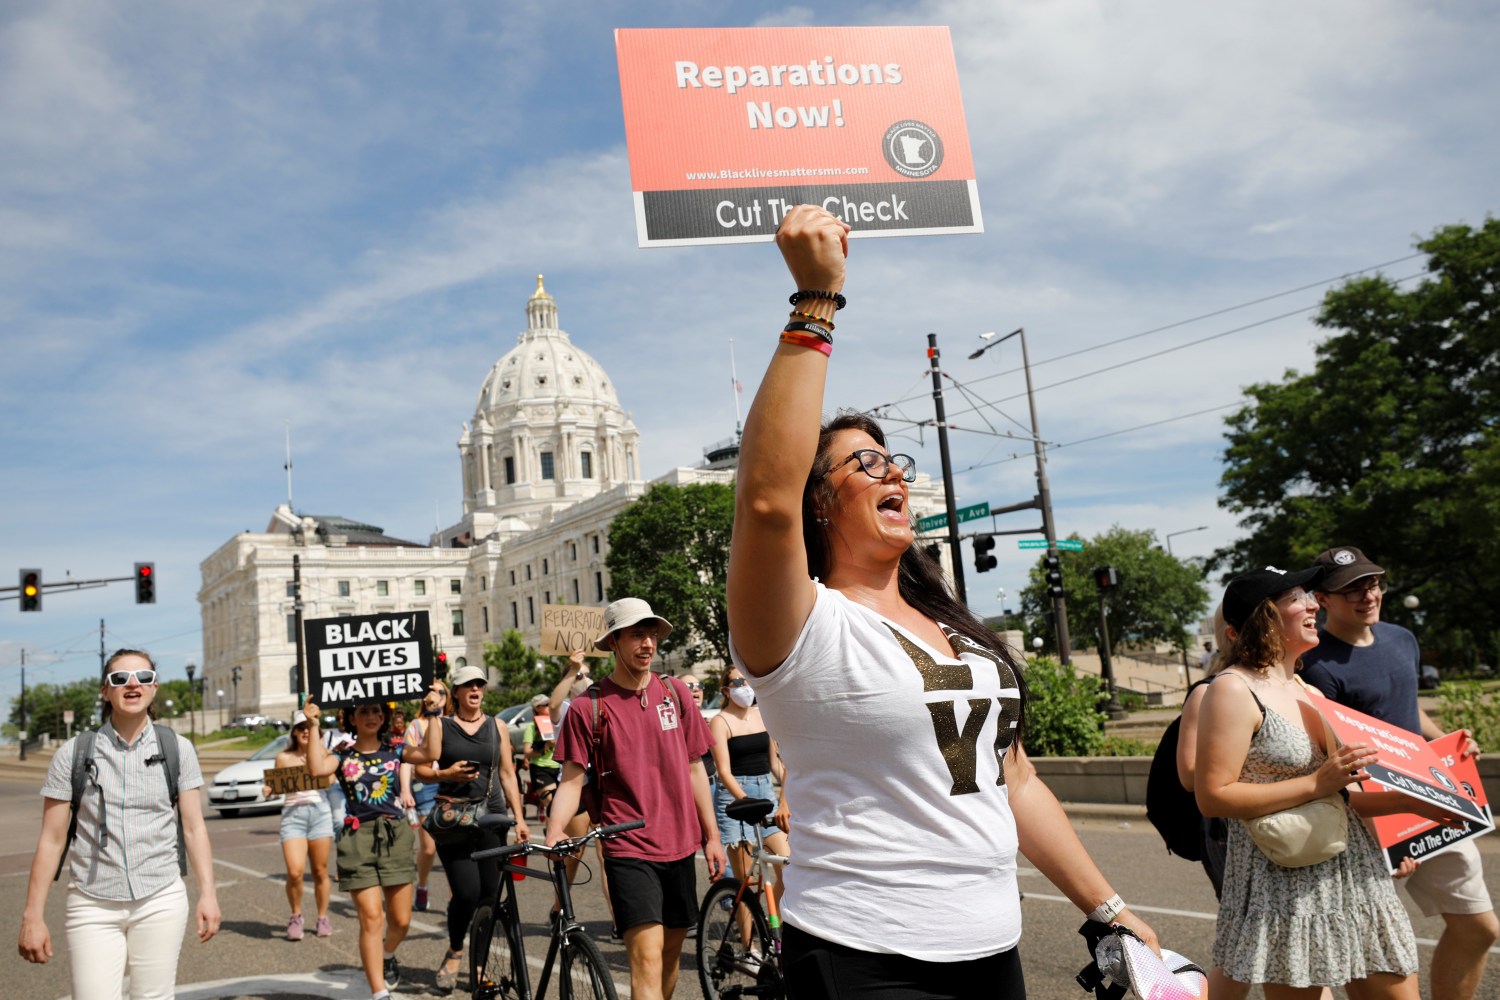 People march past the Minnesota State Capitol during the Reparations Juneteenth Celebration on Juneteenth, which commemorates the end of slavery in Texas, two years after the 1863 Emancipation Proclamation freed slaves elsewhere in the United States, in St Paul, Minnesota, U.S., June 19, 2021.  REUTERS/Nicholas Pfosi